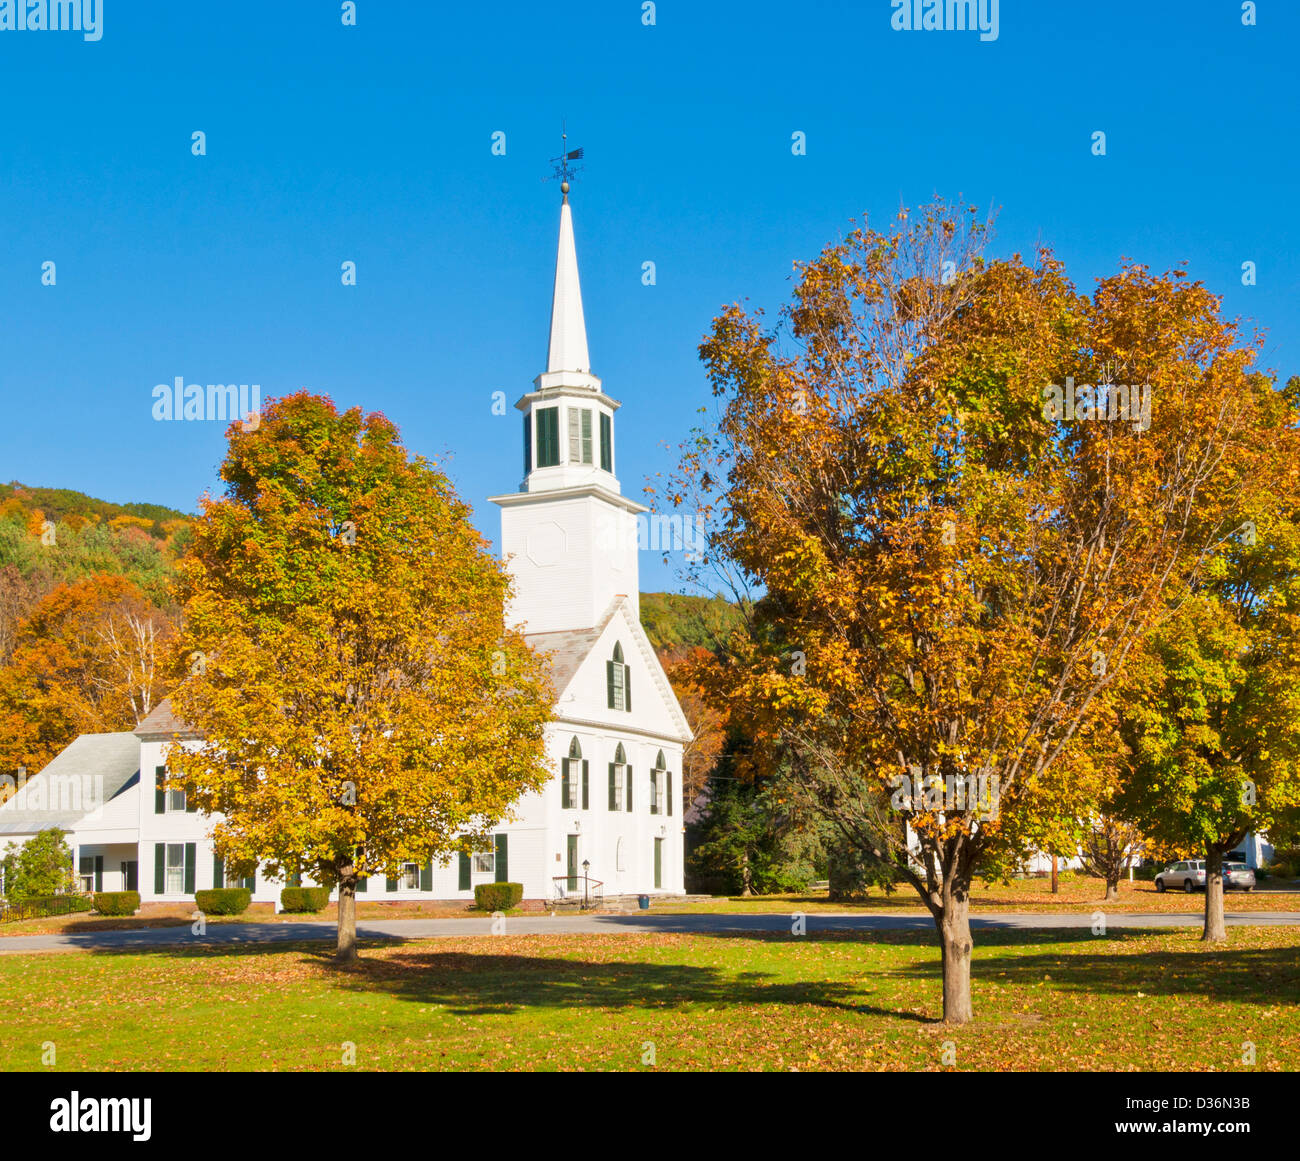 Autumn colours around the traditional white timber clad church Townshend Vermont United States of America USA Stock Photo